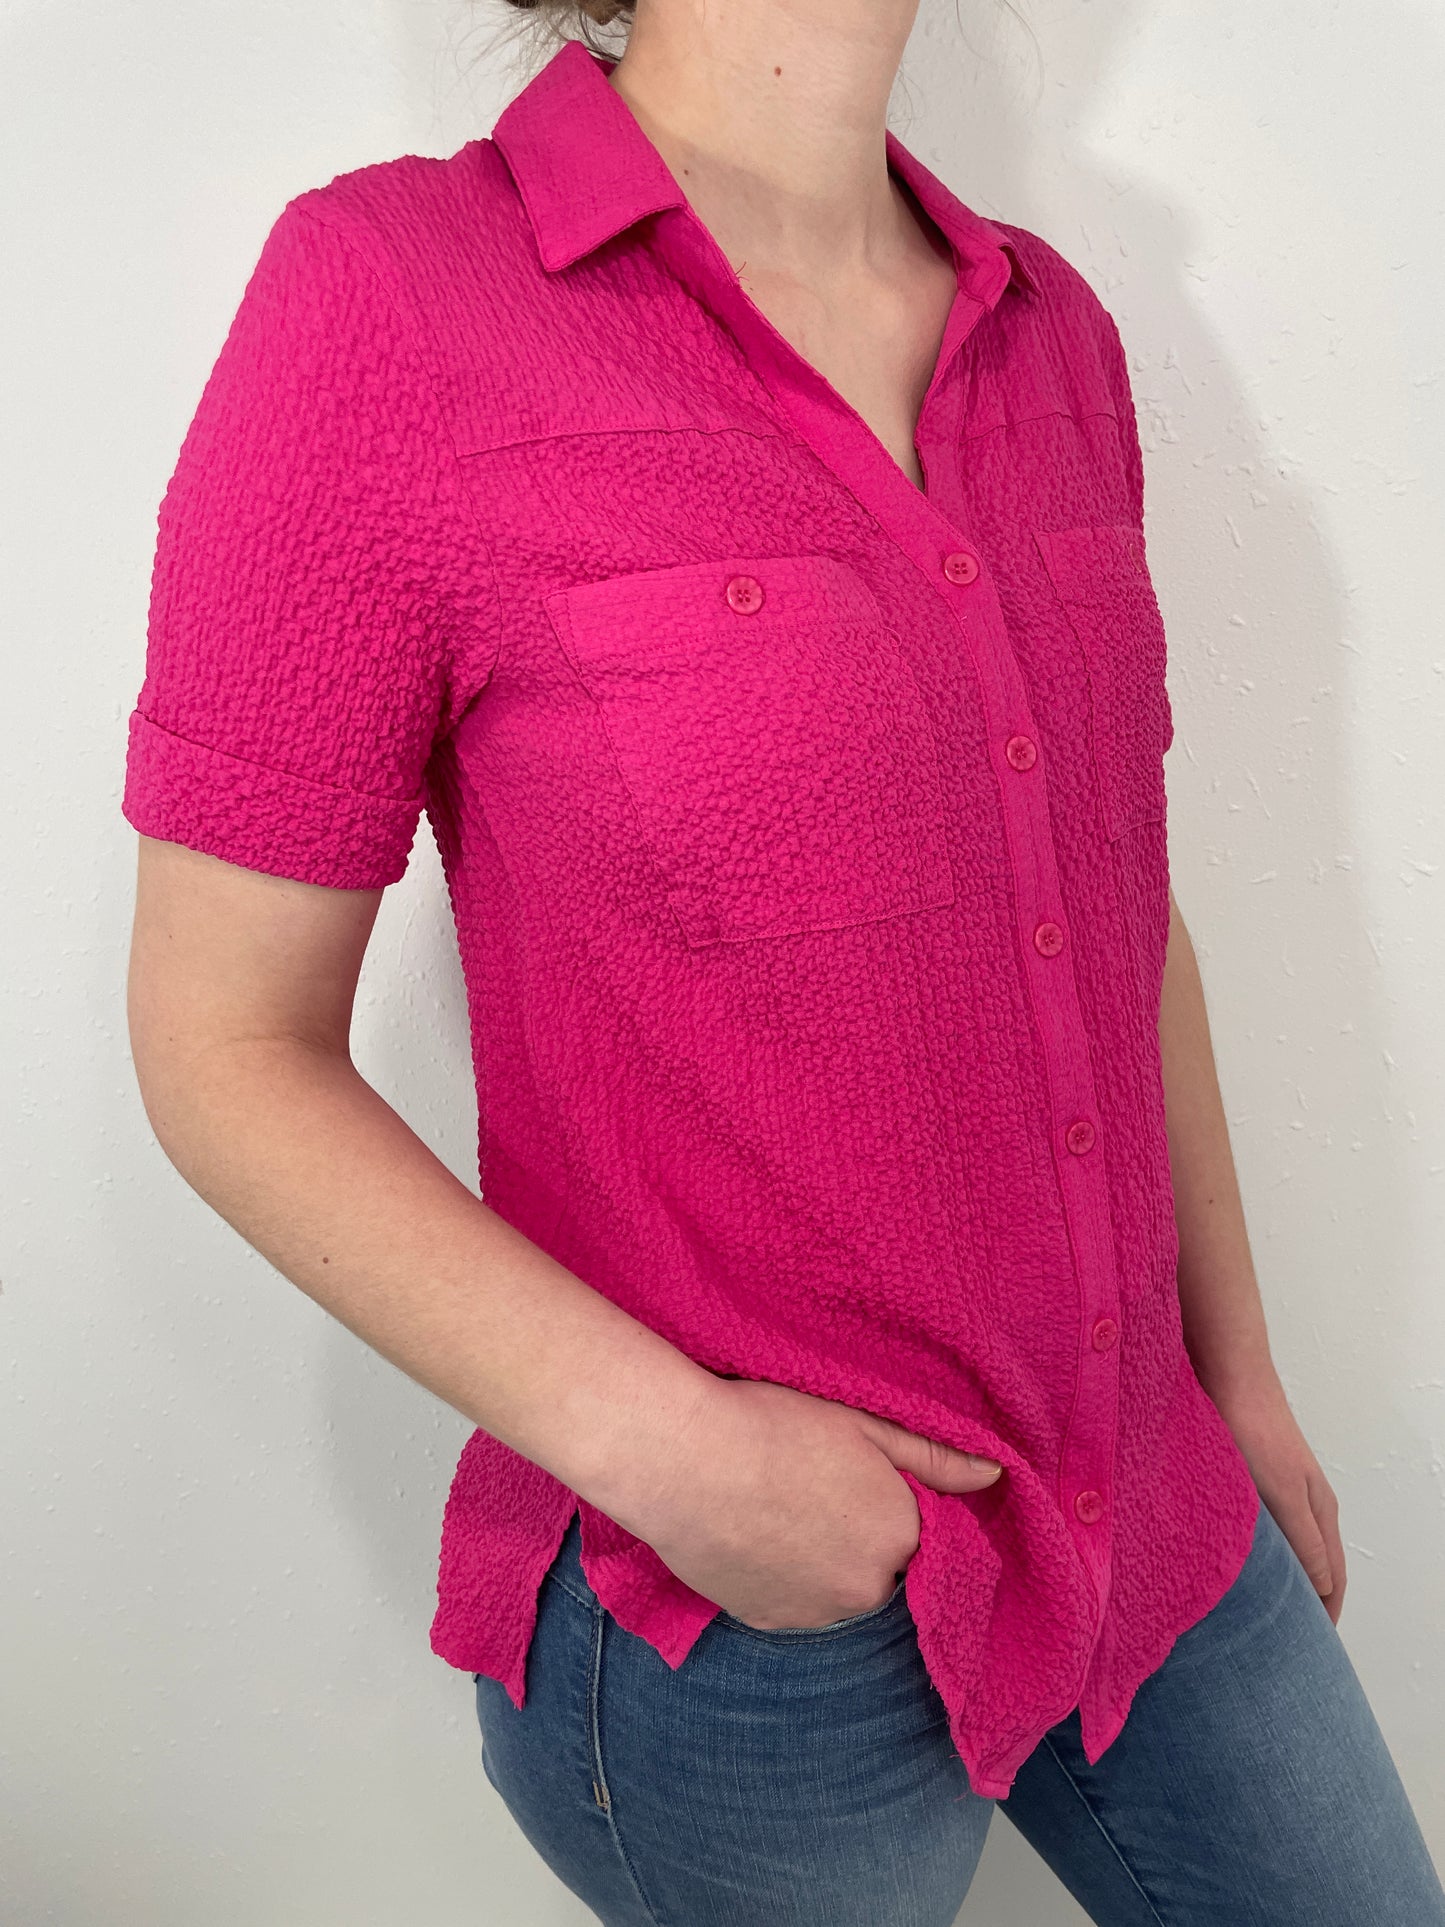 PINK IS THE NEW BLACK BUTTON UP - FUCHSA